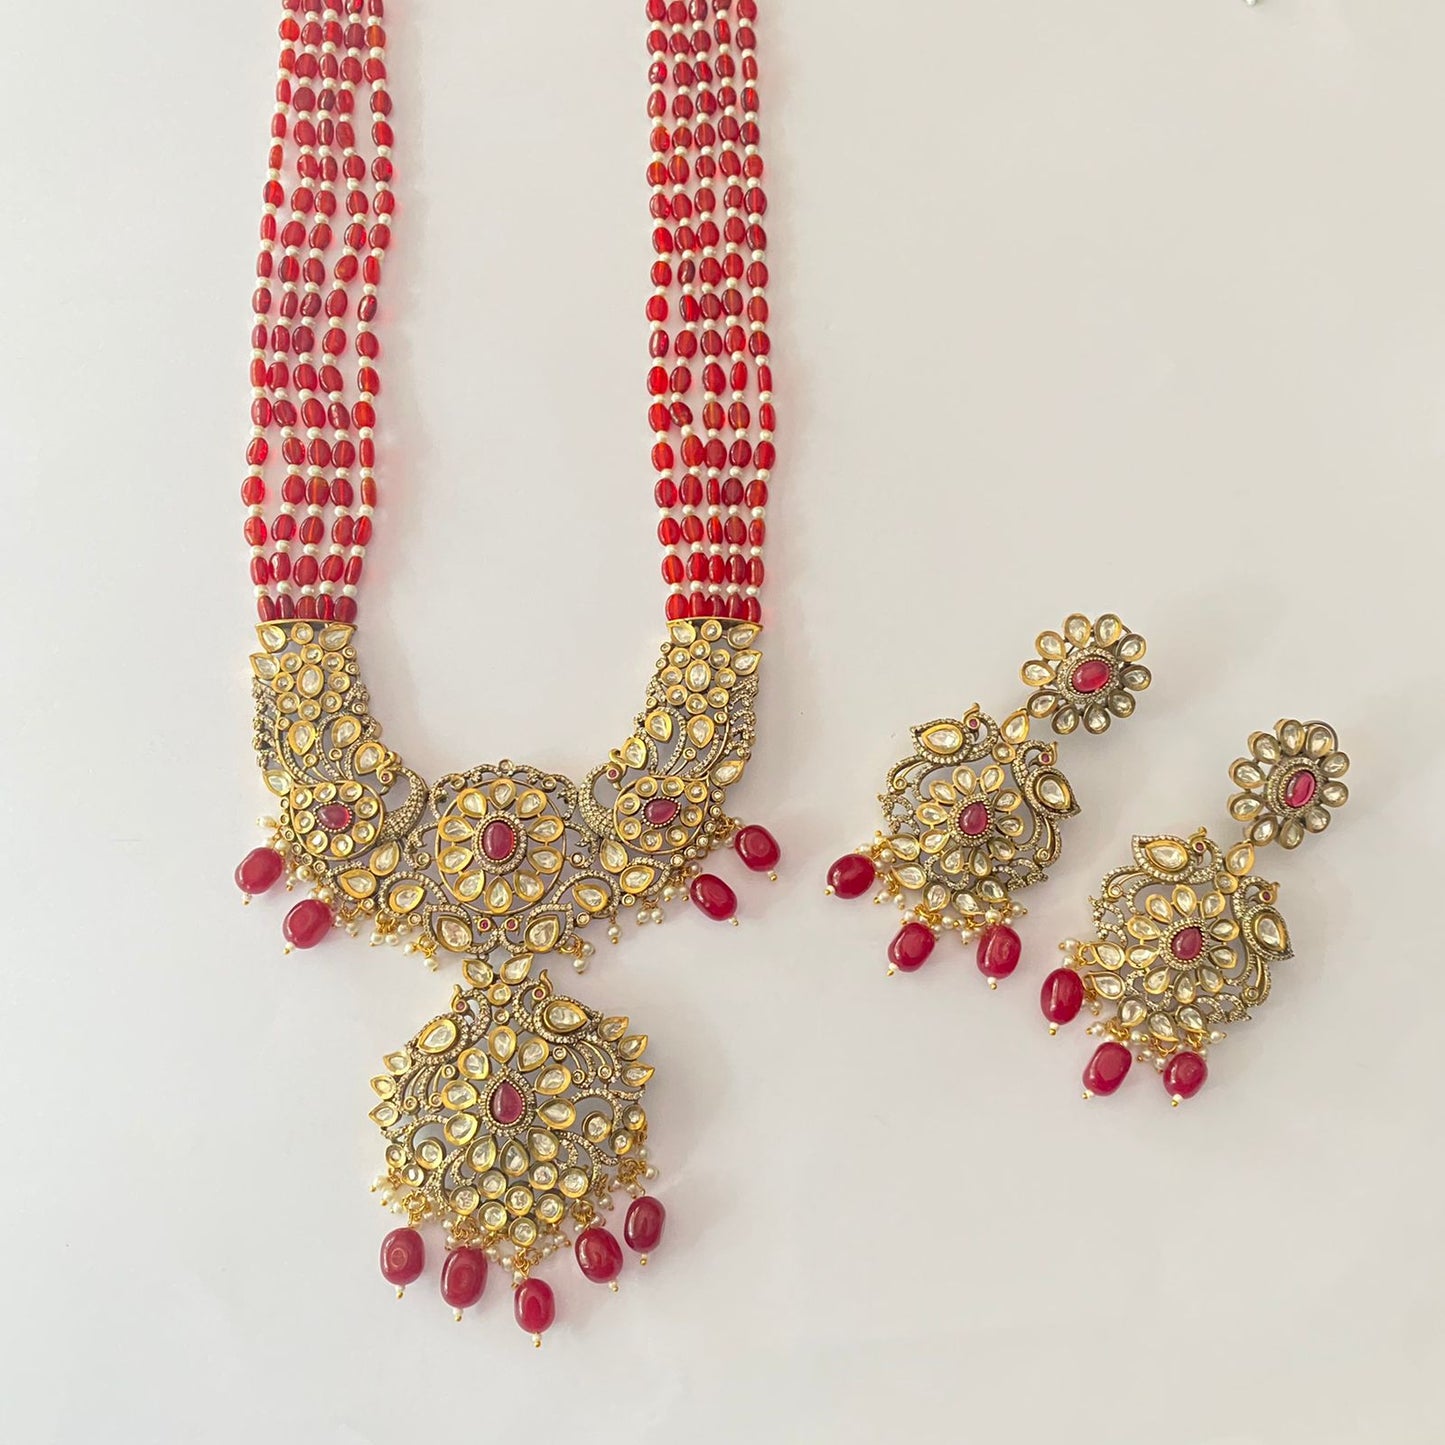 Victorian Gold Plated Peacock Ruby Stone Long Necklace Set